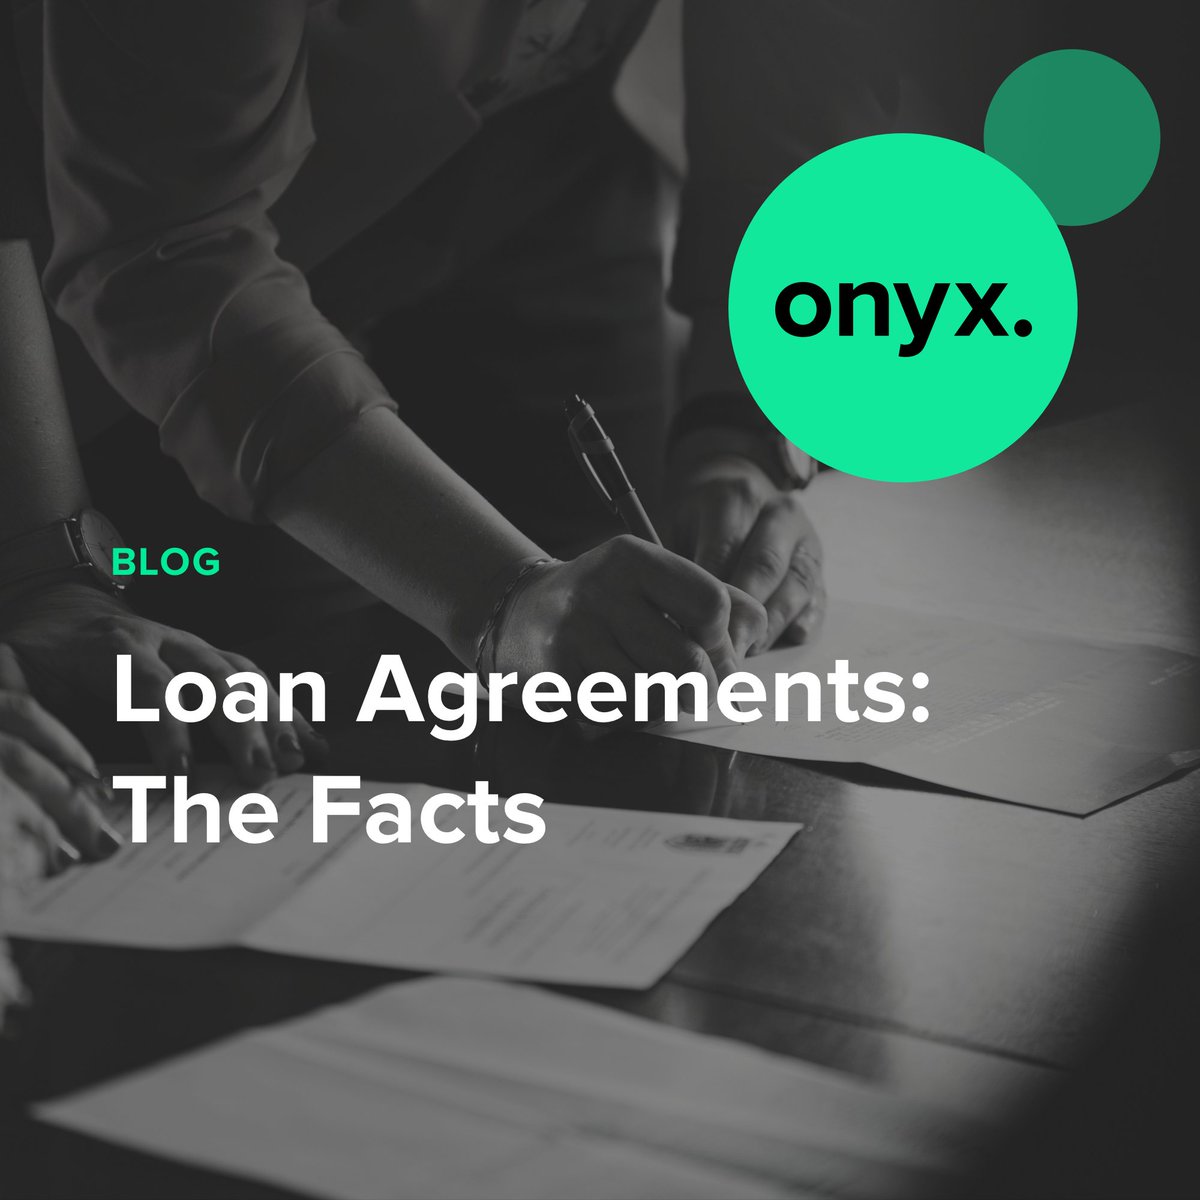 Getting ready to sign a loan agreement? Don't forget these important factors: 1. Interest rate 2. Payment plan 3. Receipts 4. Late payment penalties 5. Default clauses Make sure you know exactly what you're signing up for! ow.ly/gKtJ50RkTzn  #LoanAgreement #MoneyMatters